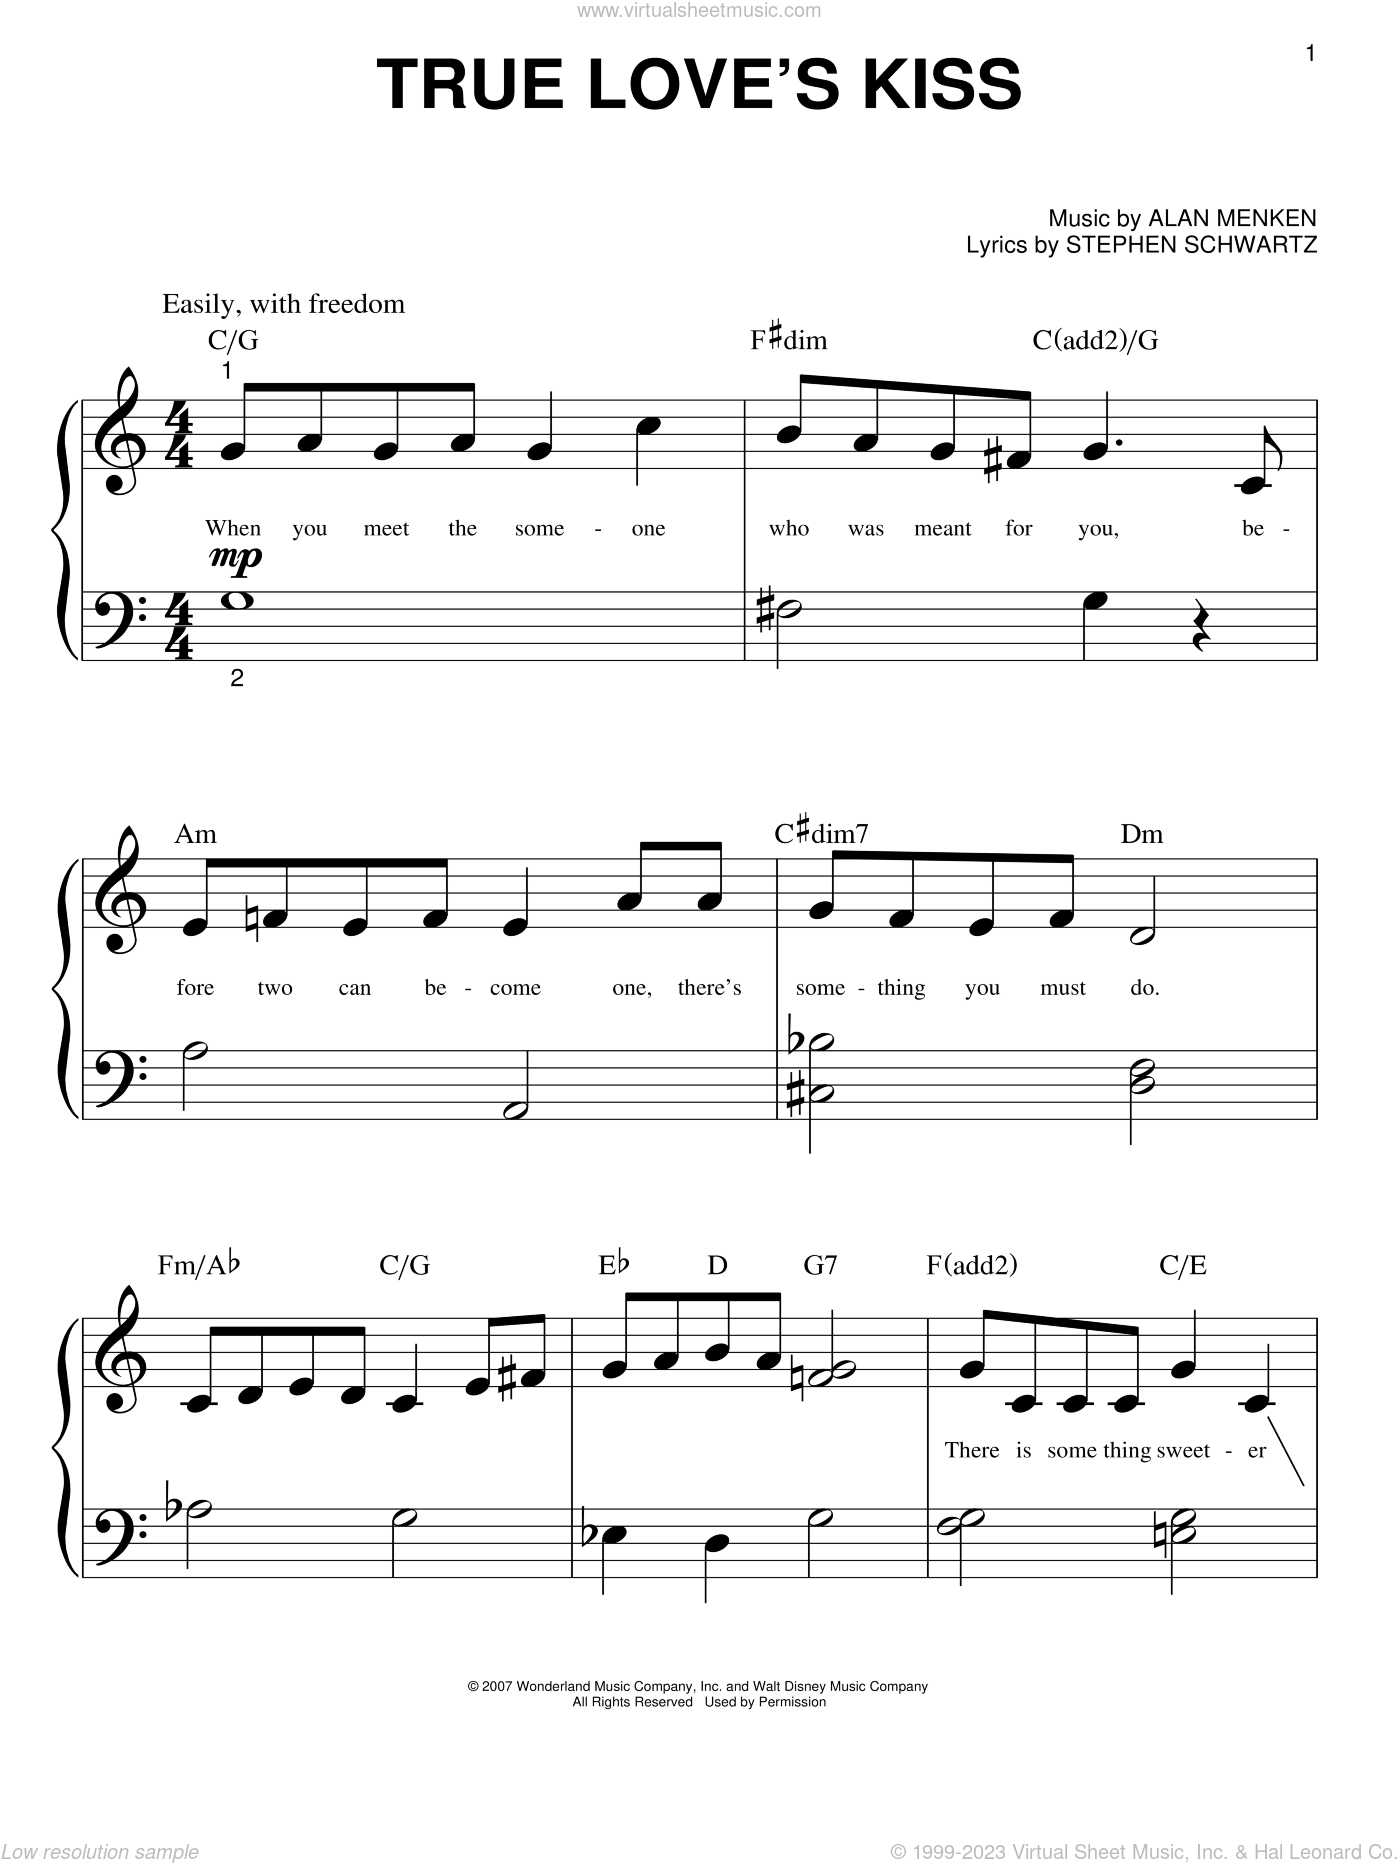 True Love's First Kiss sheet music for piano solo (PDF)